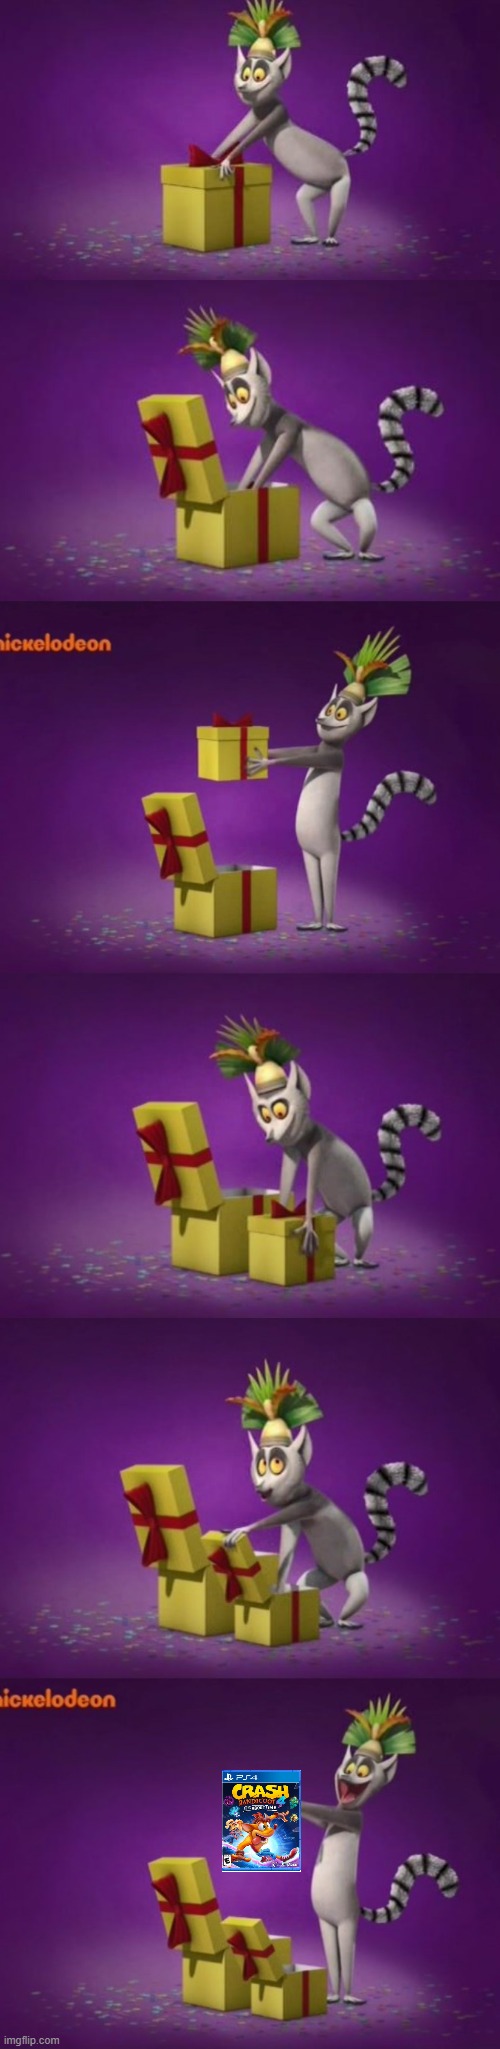 king julien unboxing crash bandicoot 4 | image tagged in king julian unboxing present in his mind,crash bandicoot,playstation,activision | made w/ Imgflip meme maker